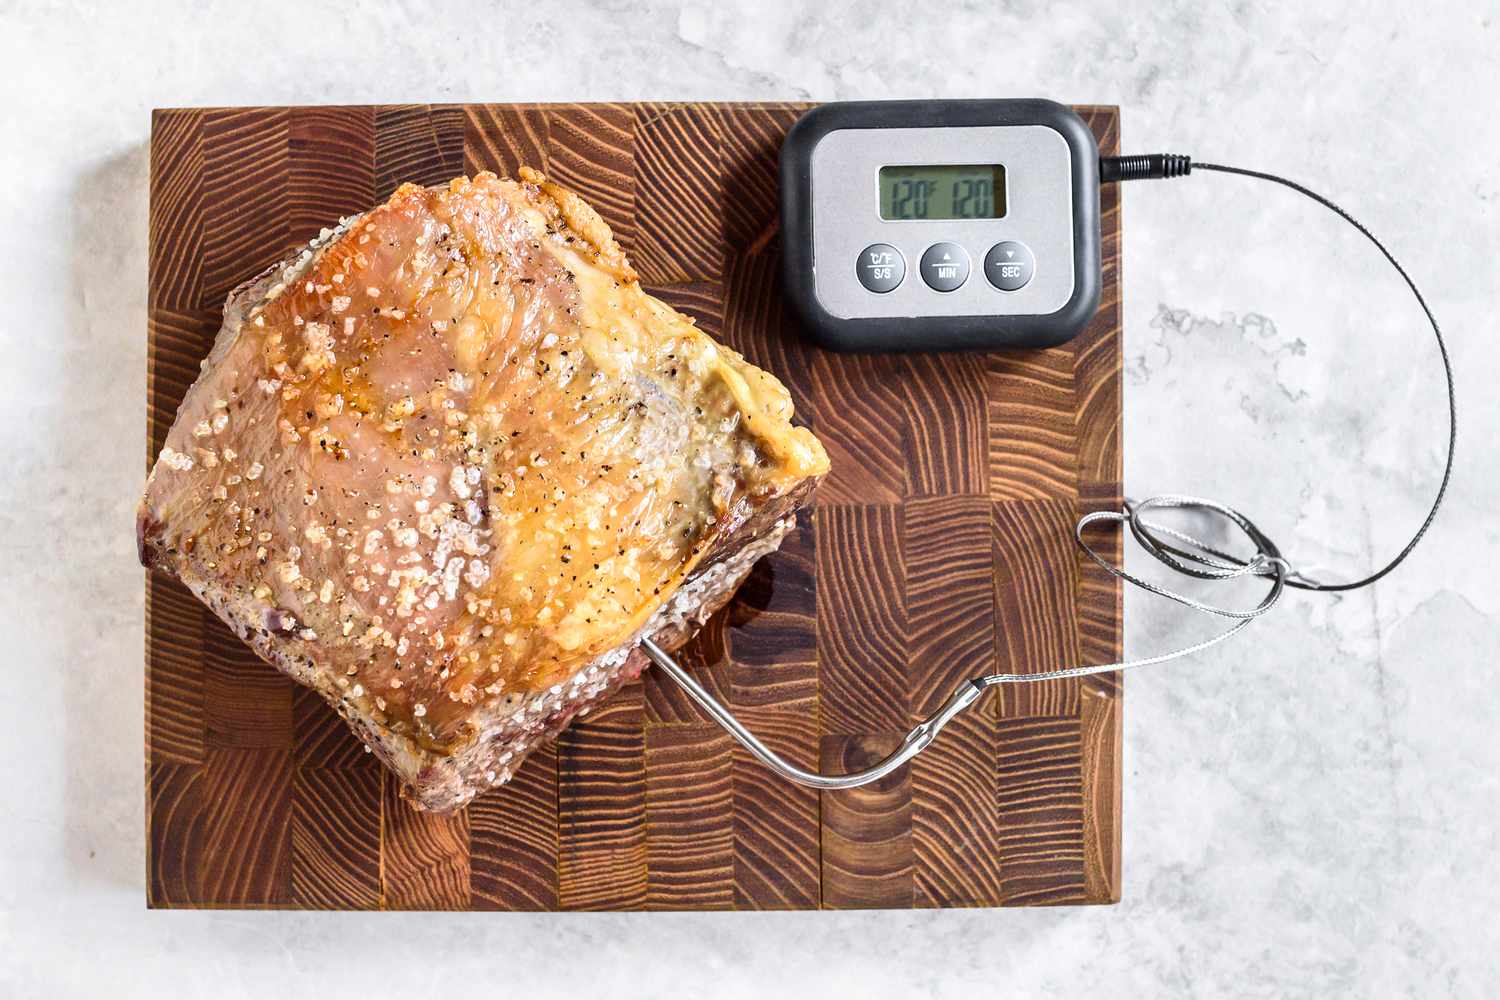 Prime Rib Roast with a digital meat thermometer inserted